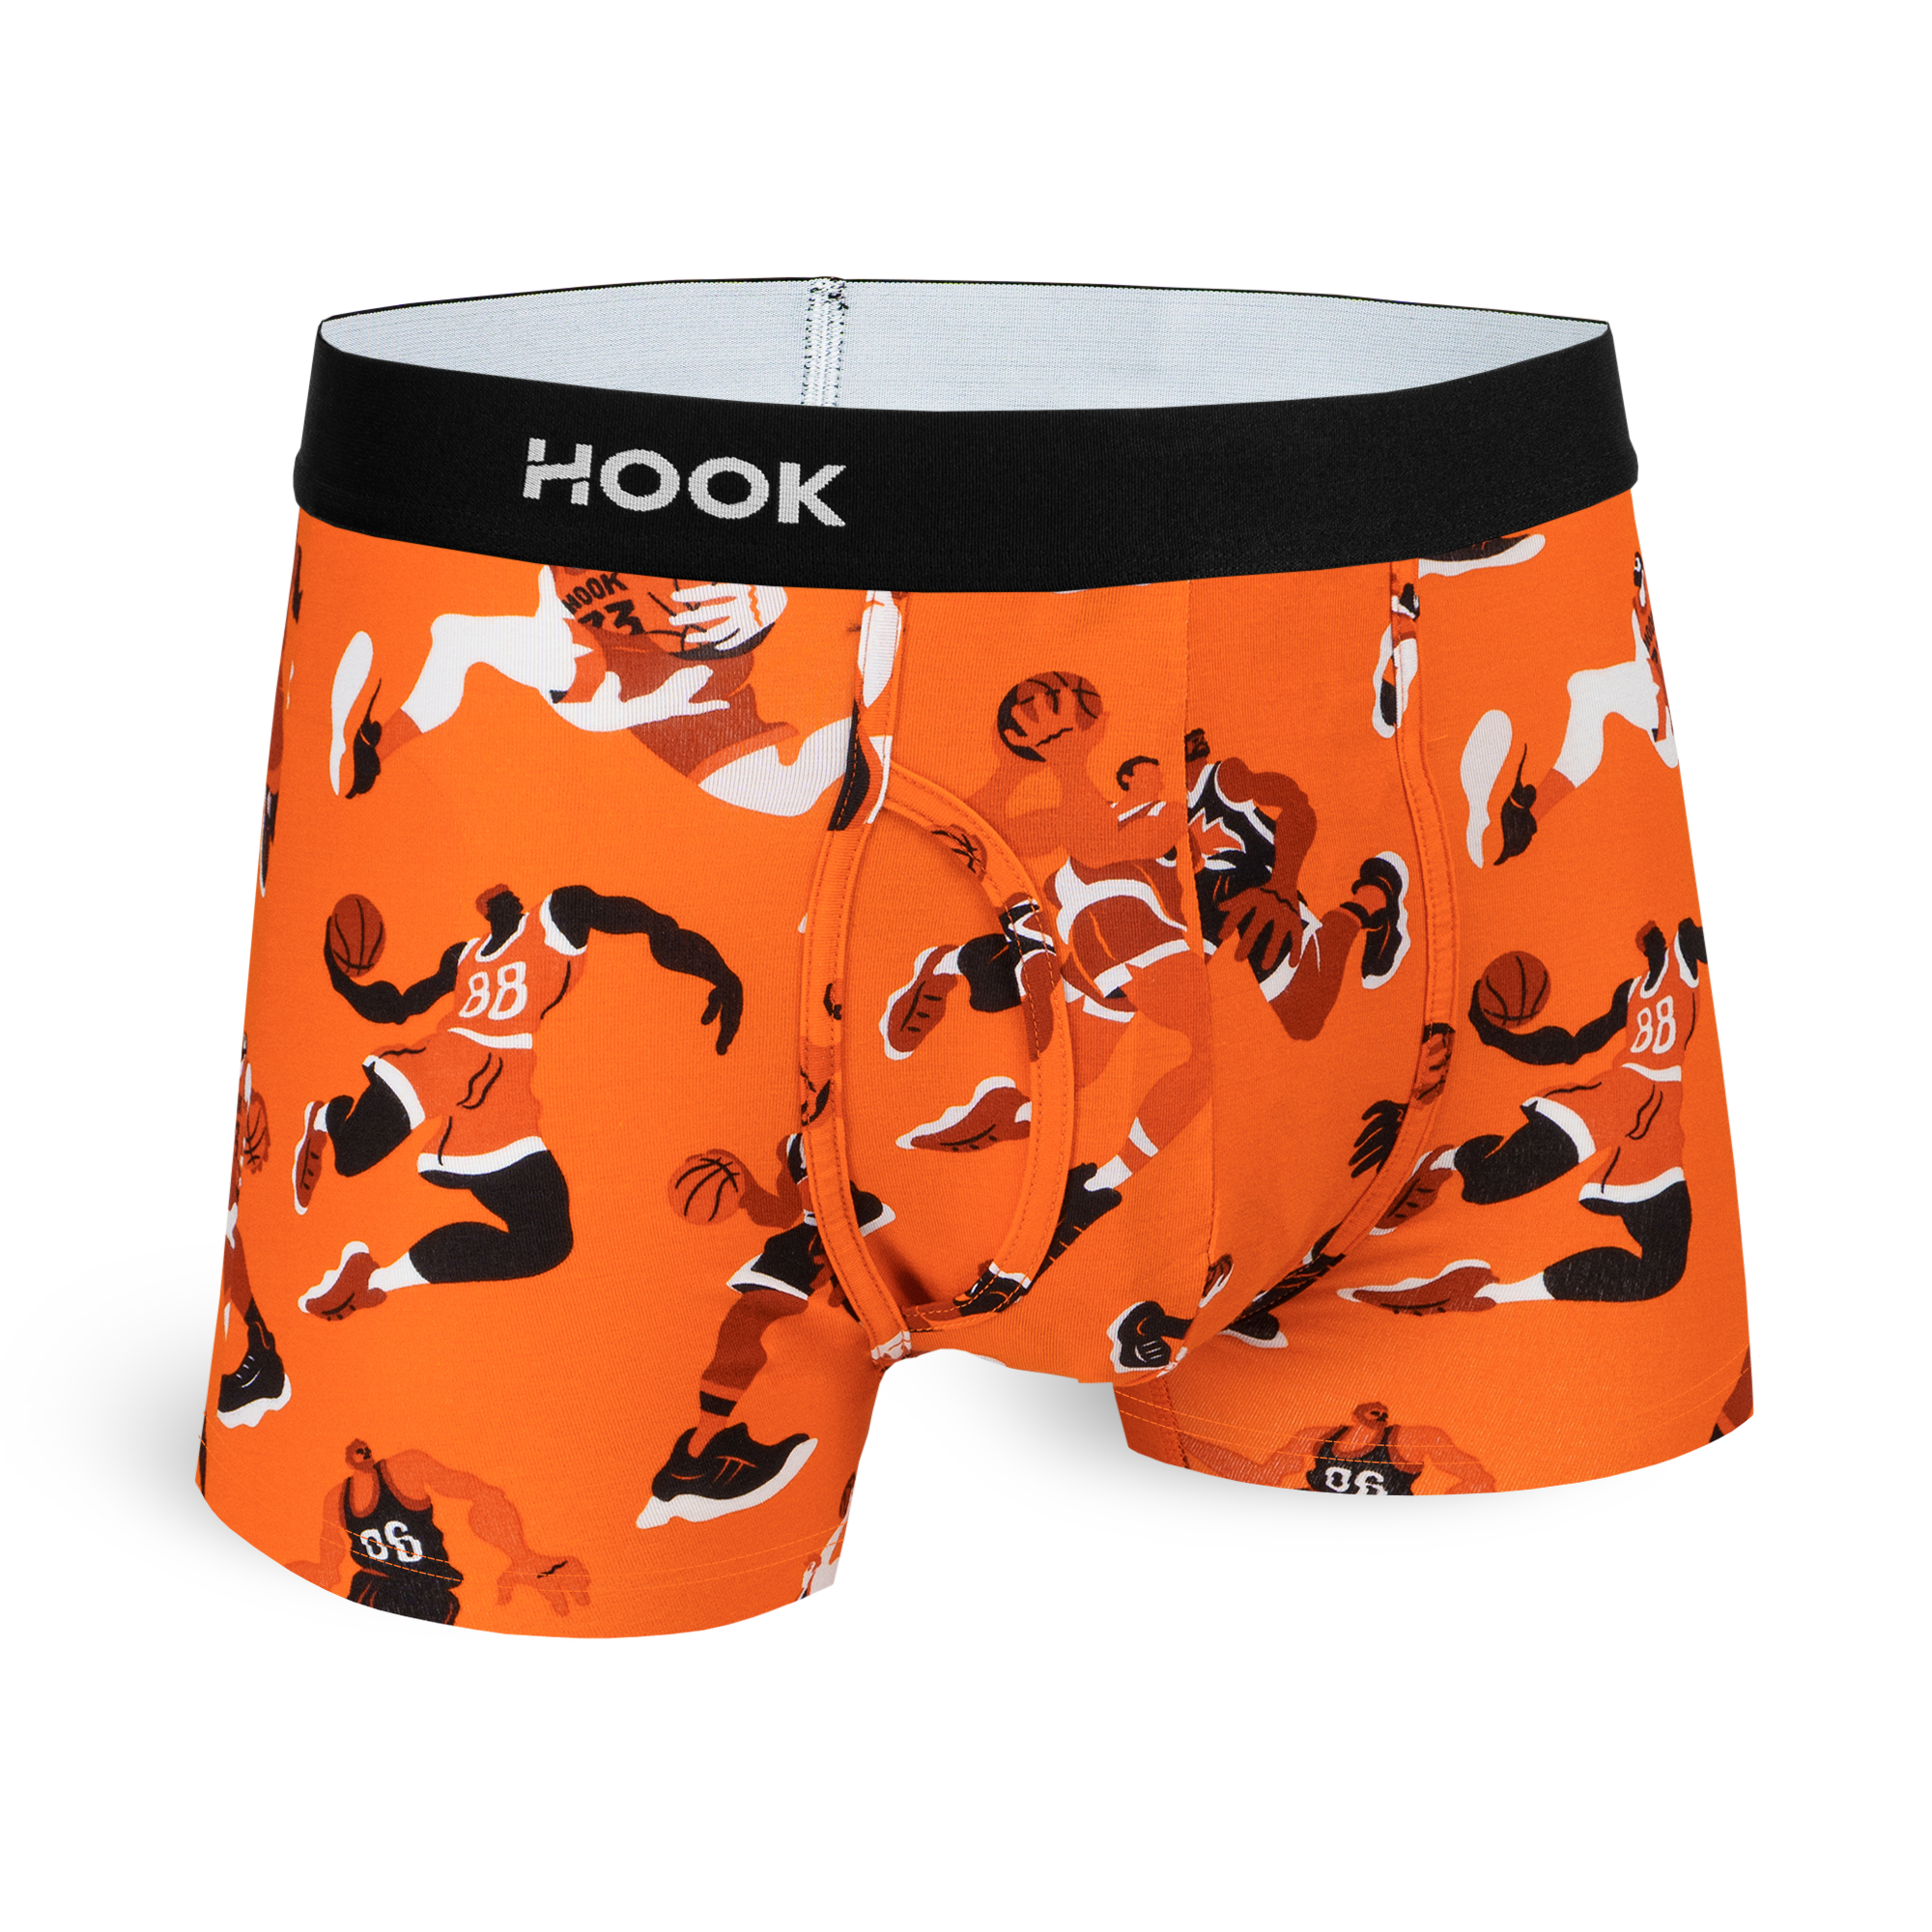 Pack de 20 boxers courts Feel & Fly : Mystère